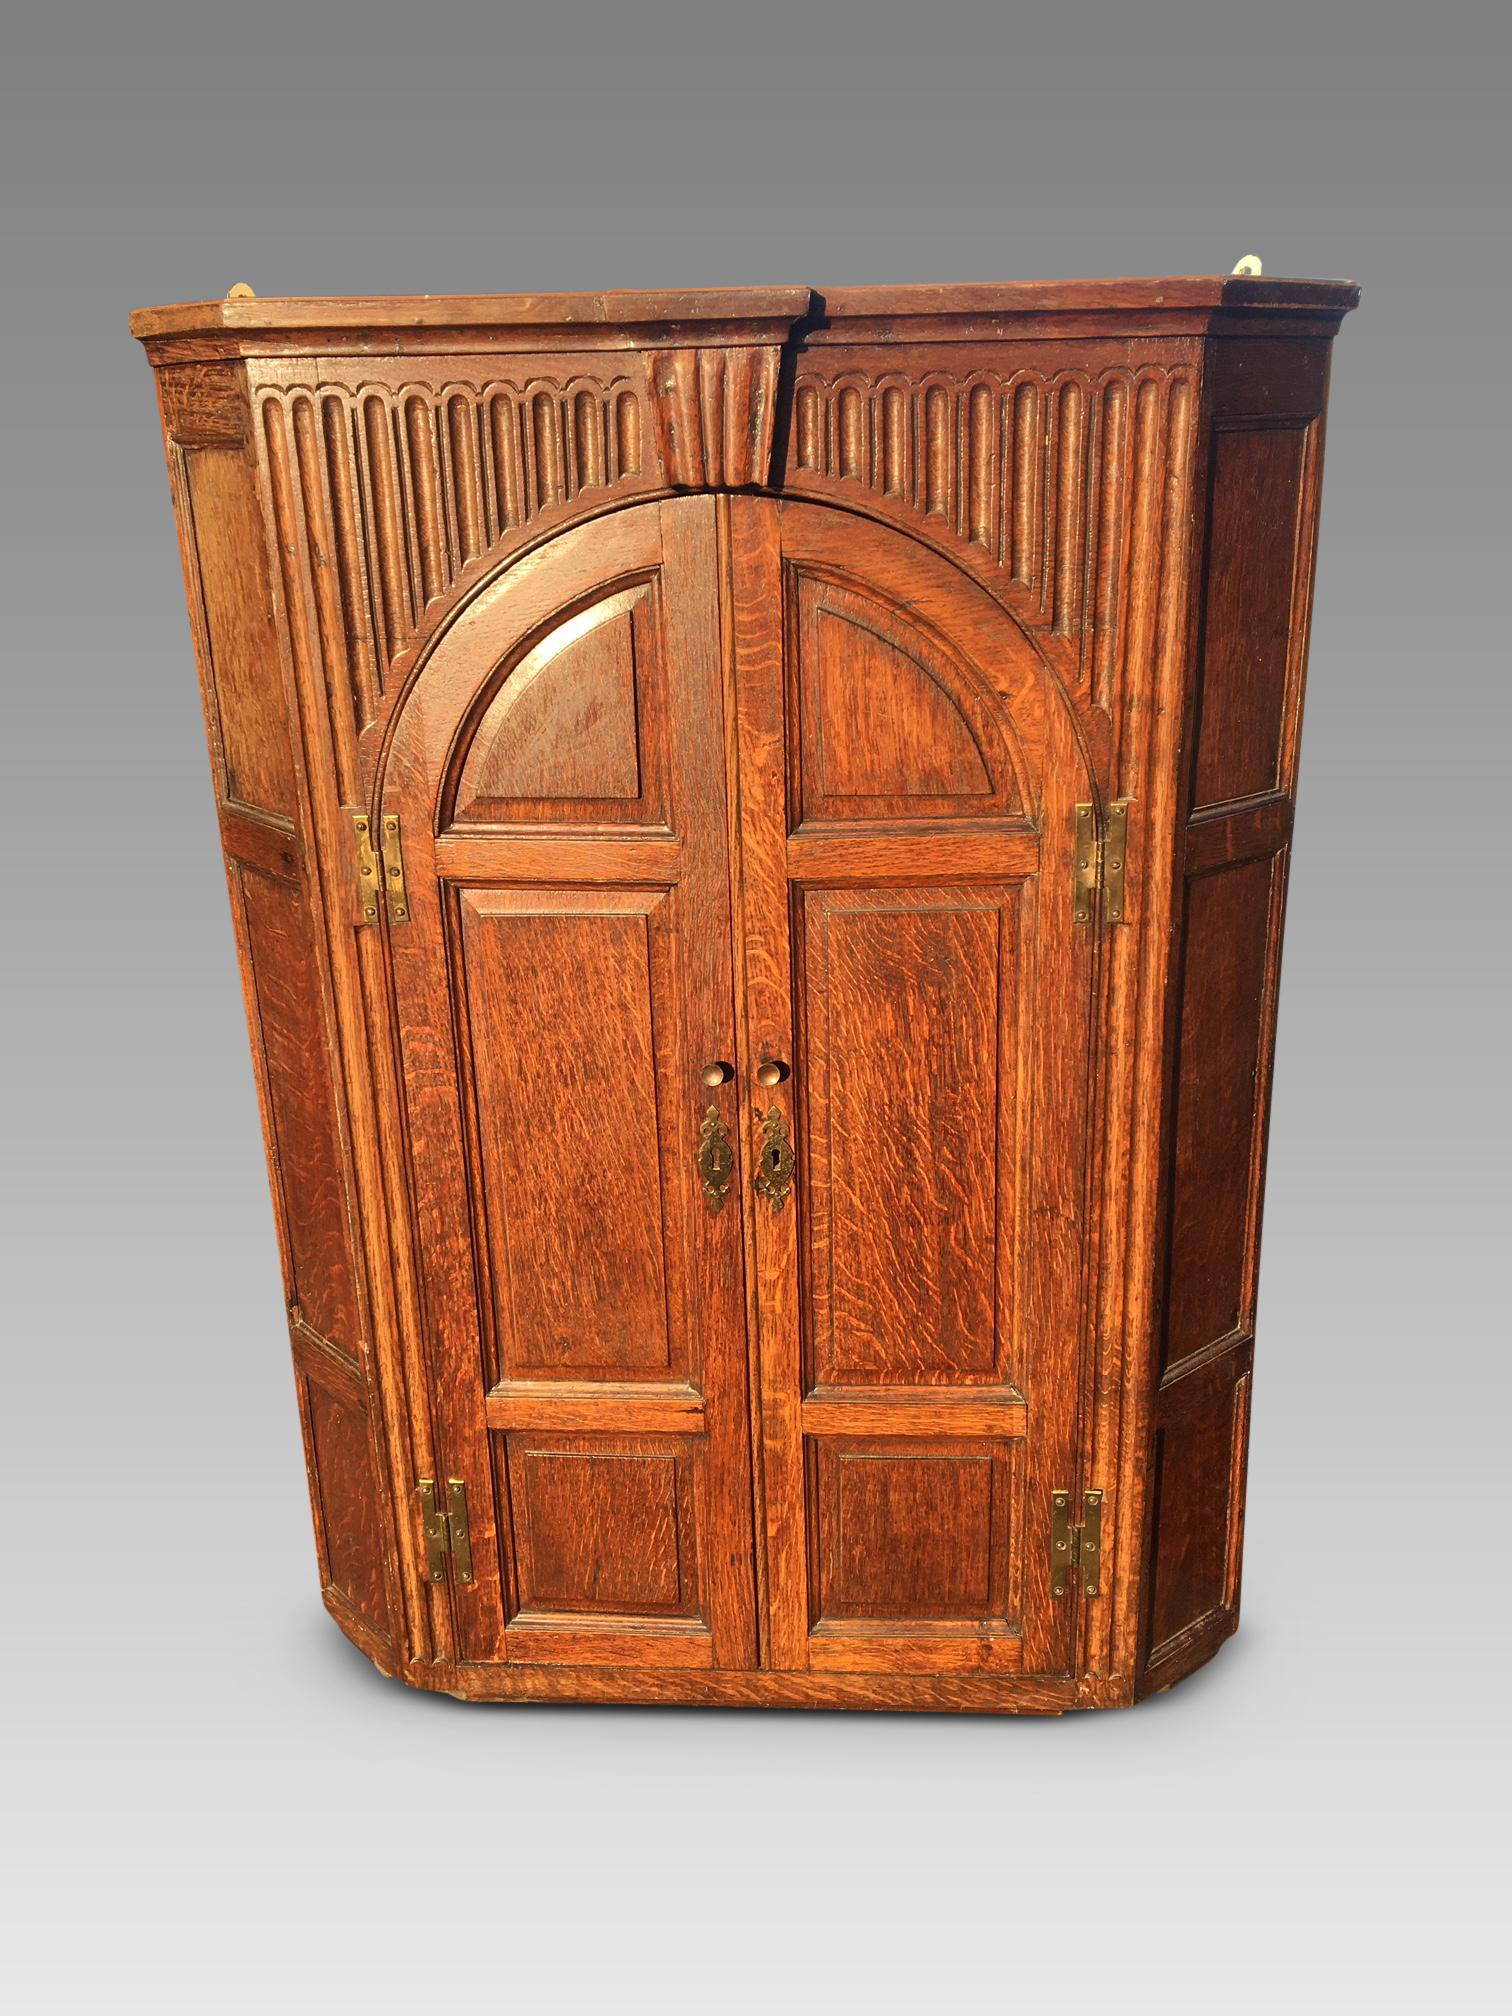 Attractive Georgian oak corner cupboard in good condition. English, circa 1800.
This delightful cupboard is well constructed with arch panel doors and panelled sides.
The wood is a mellow medium oak with an attractive grain and very desirable